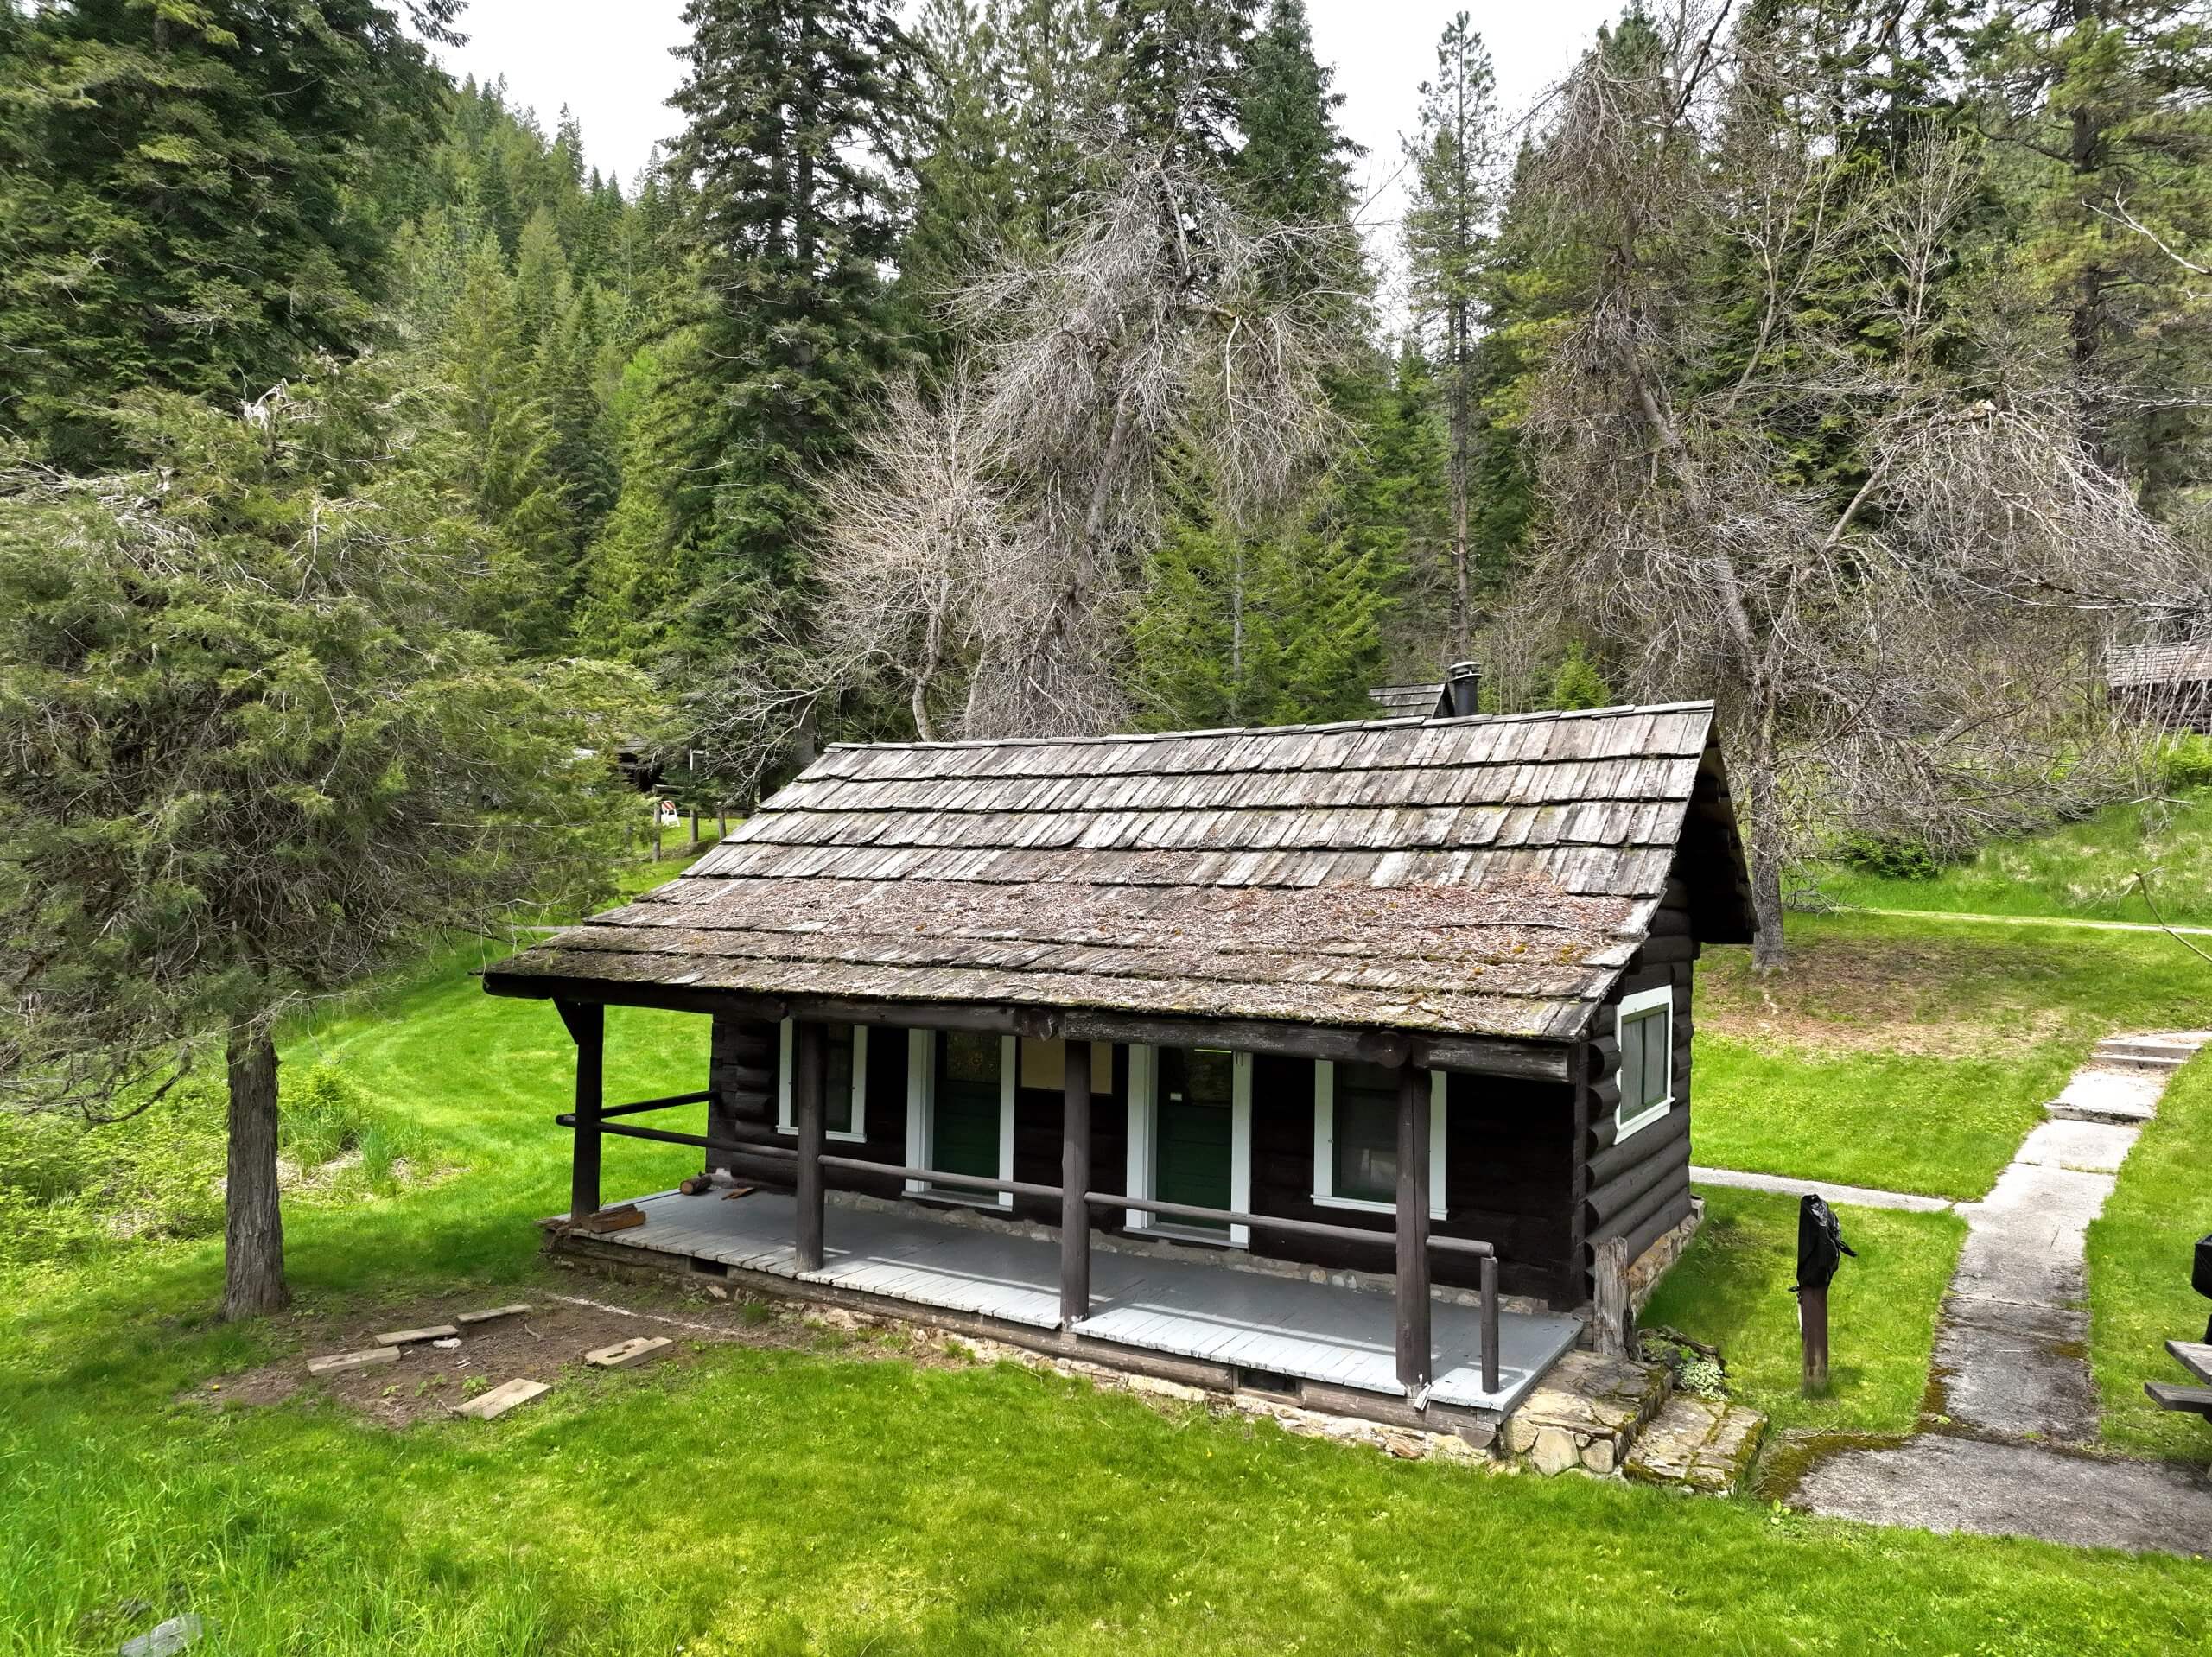 Log cabin surrounded by trees and grass.